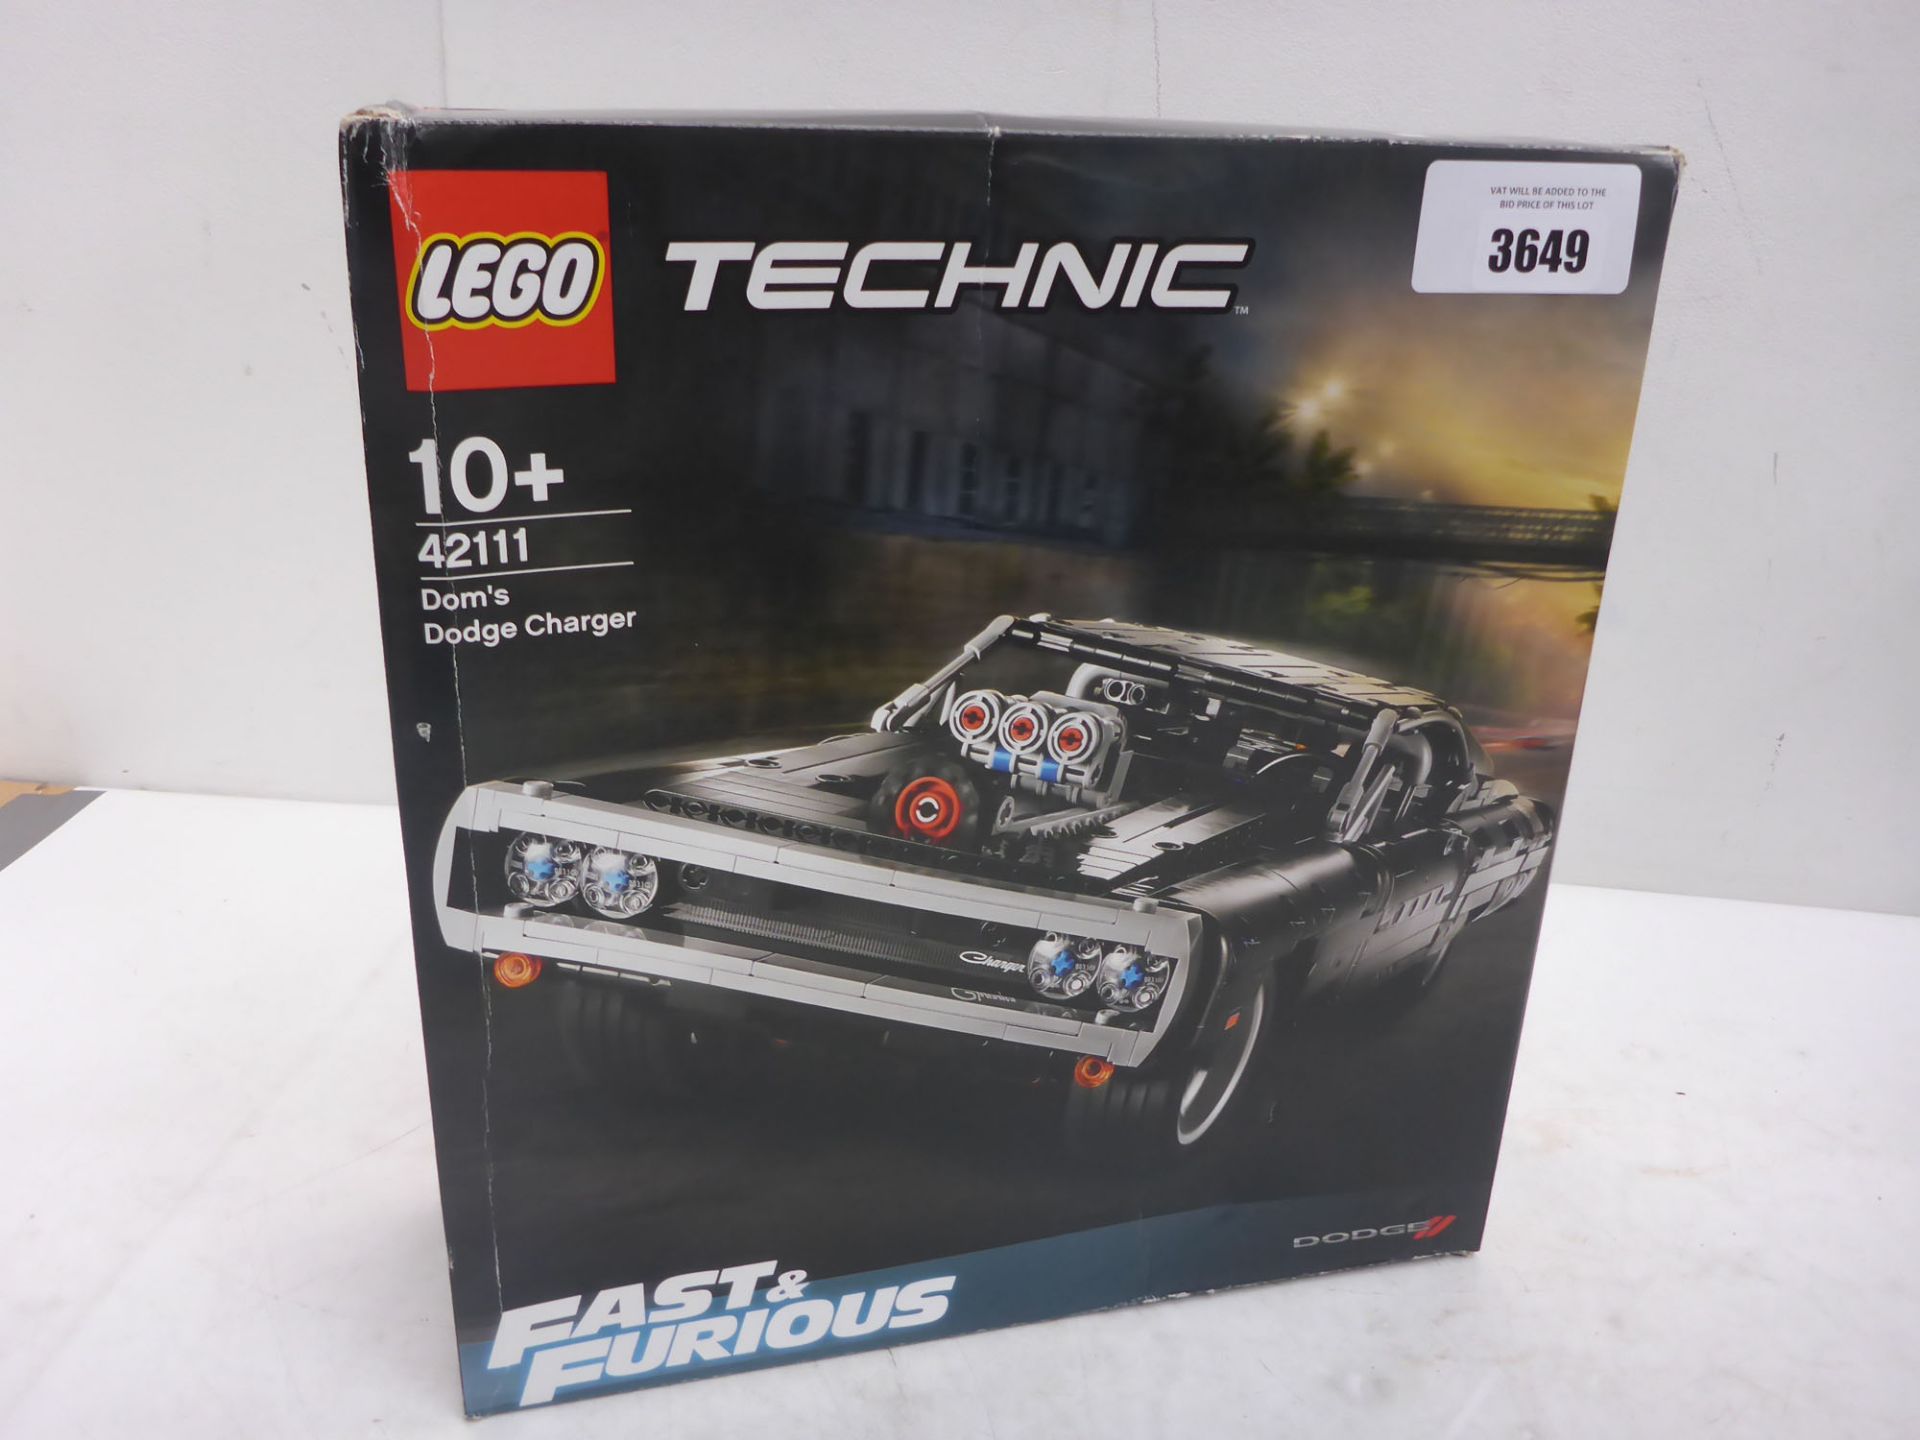 Lego Technic Fast & Furious Dom's dogde Charger 42111 kit (boxed & sealed)